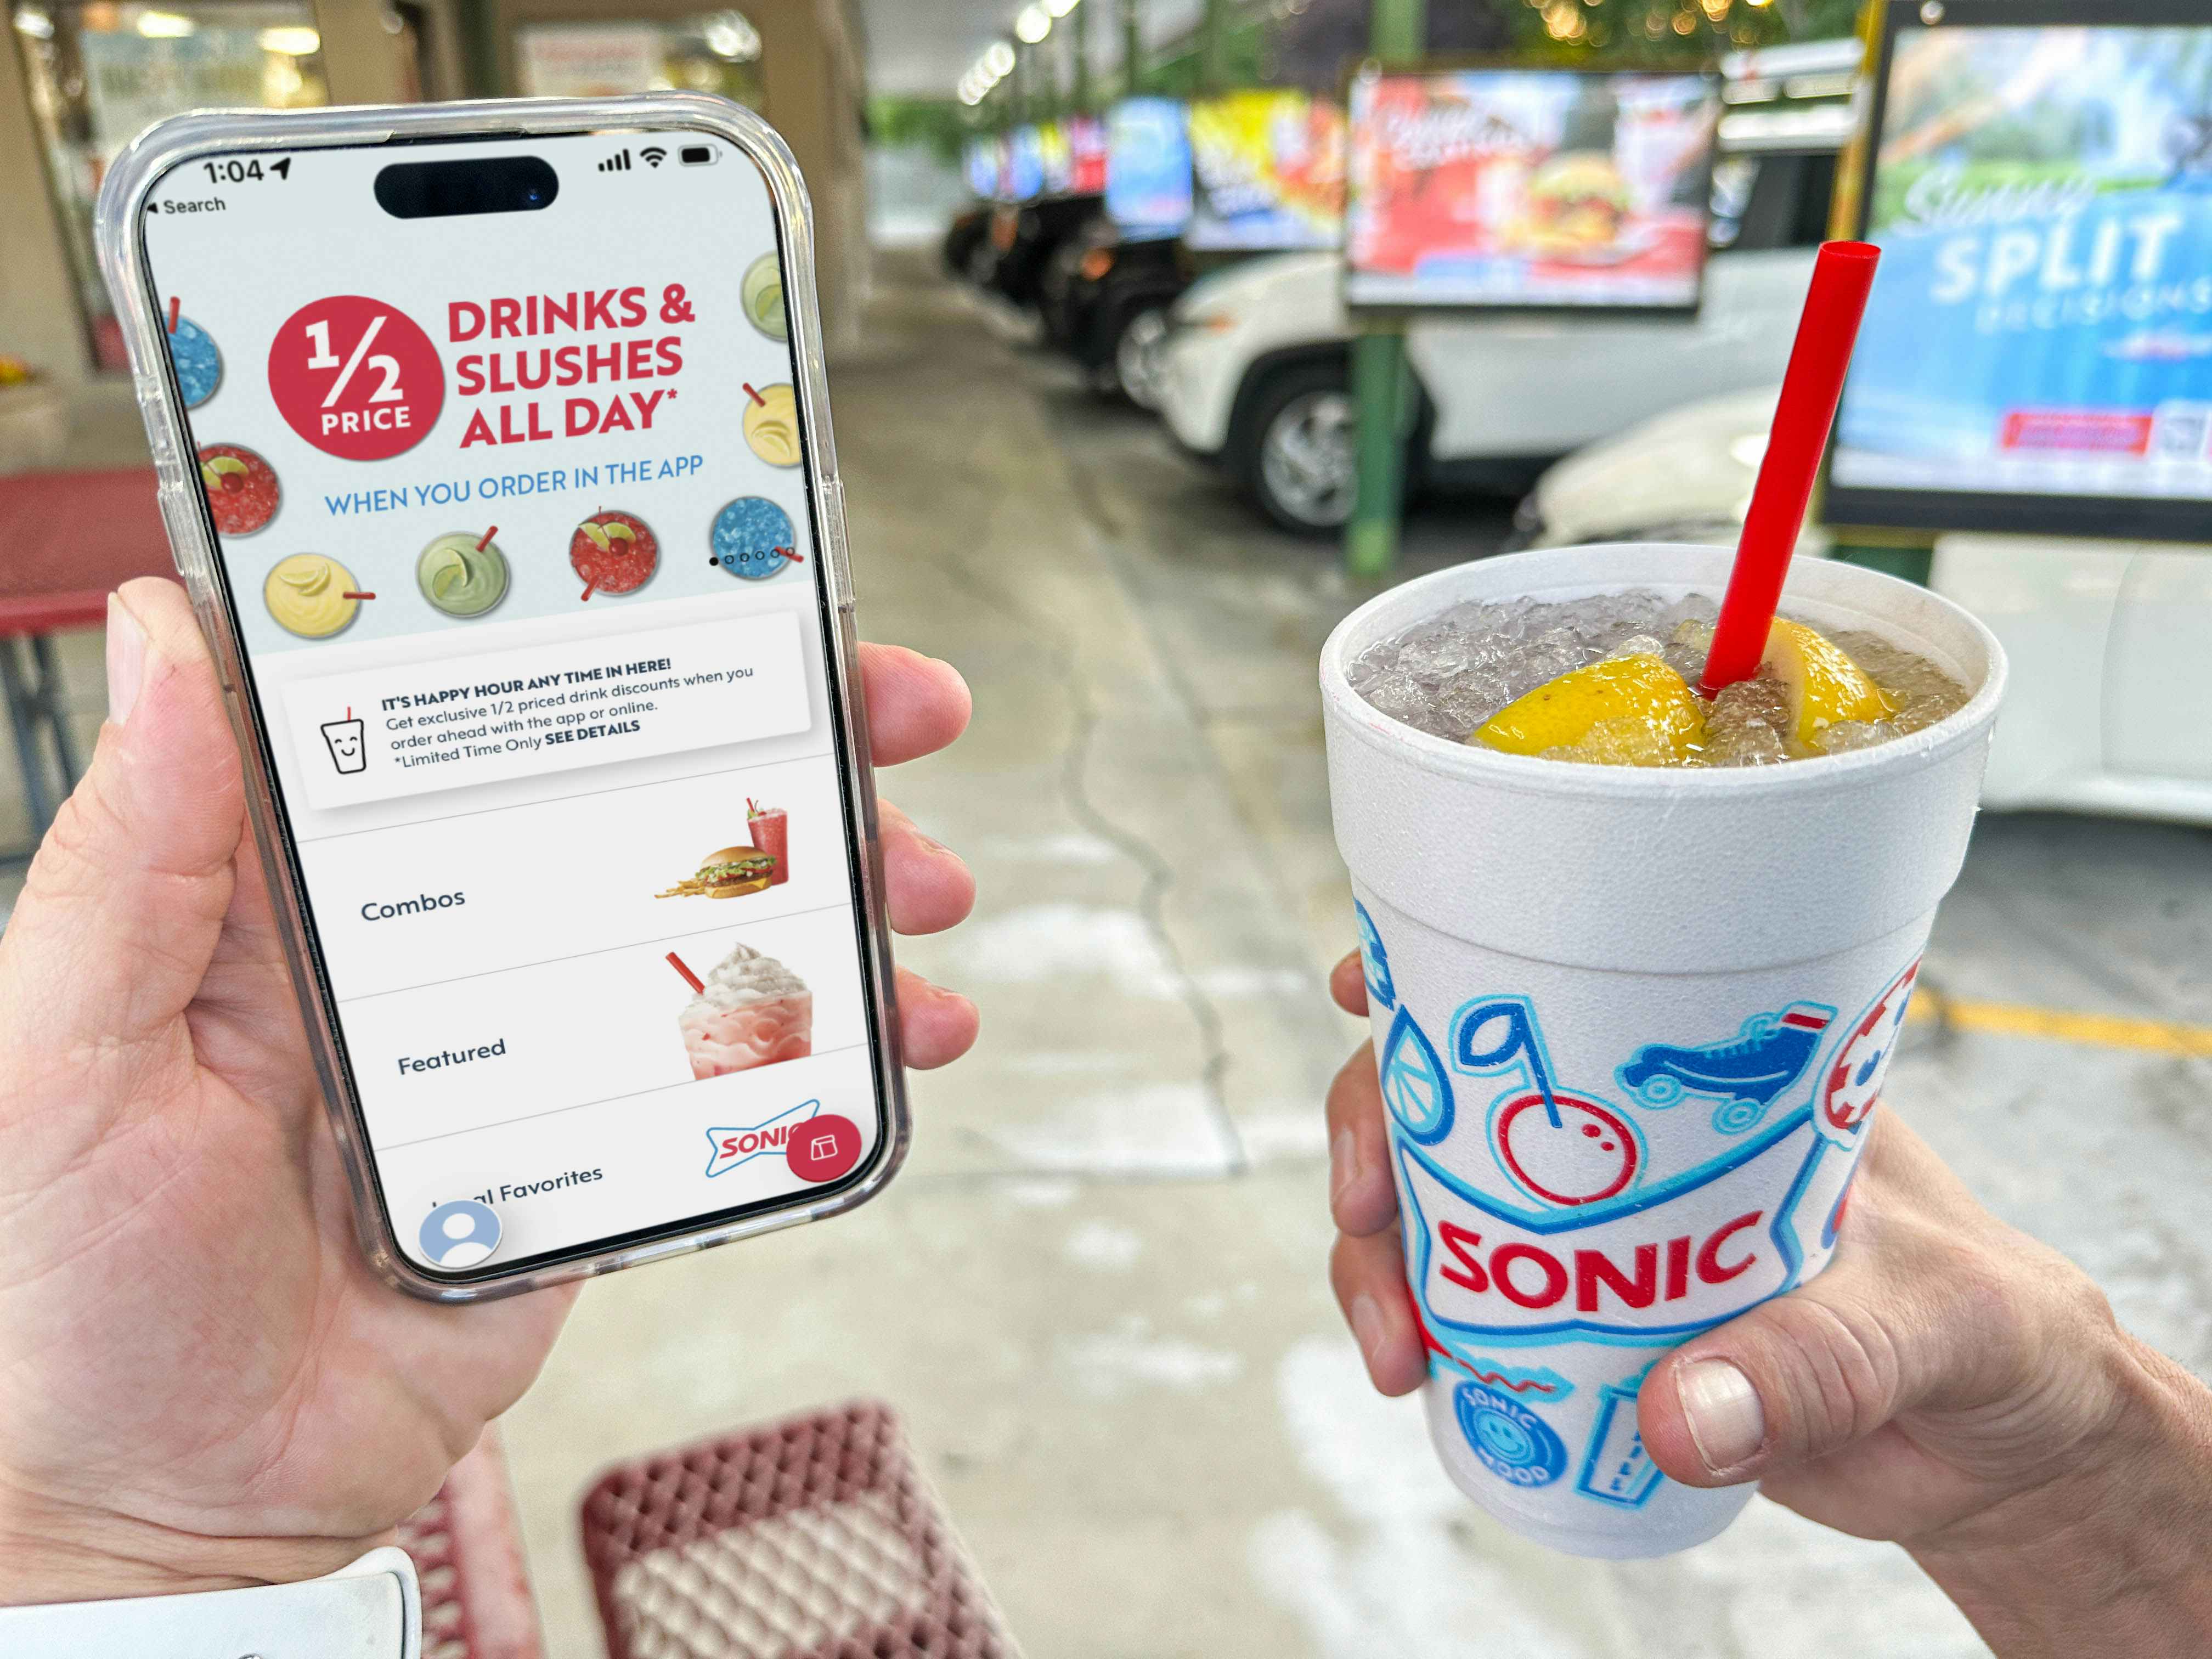 sonic app on cellphone while a person is holding a sonic drink